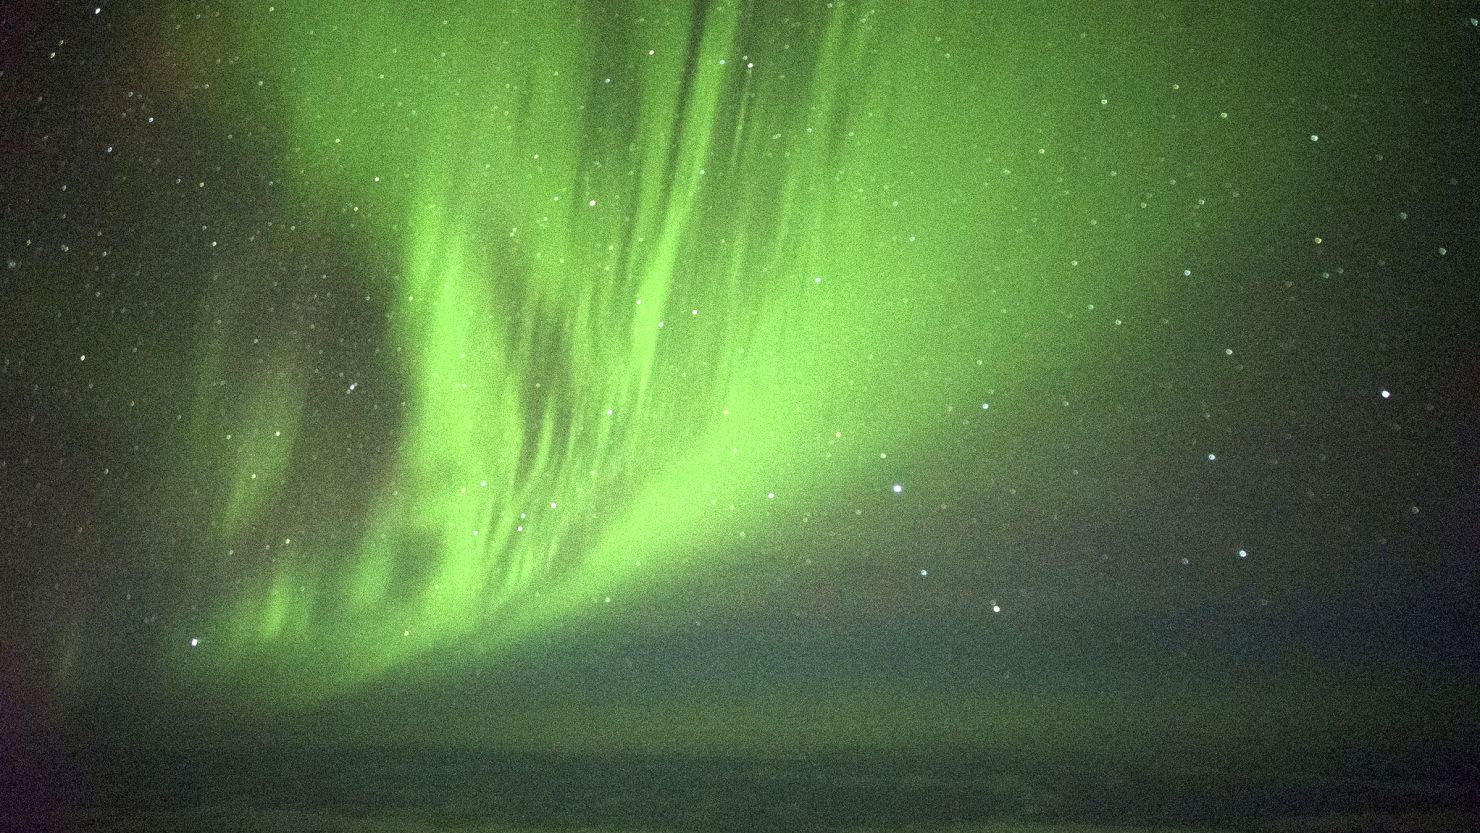 An up-close look at the Aurora Australis from a special flight that left Dunedin, New Zealand Thursday